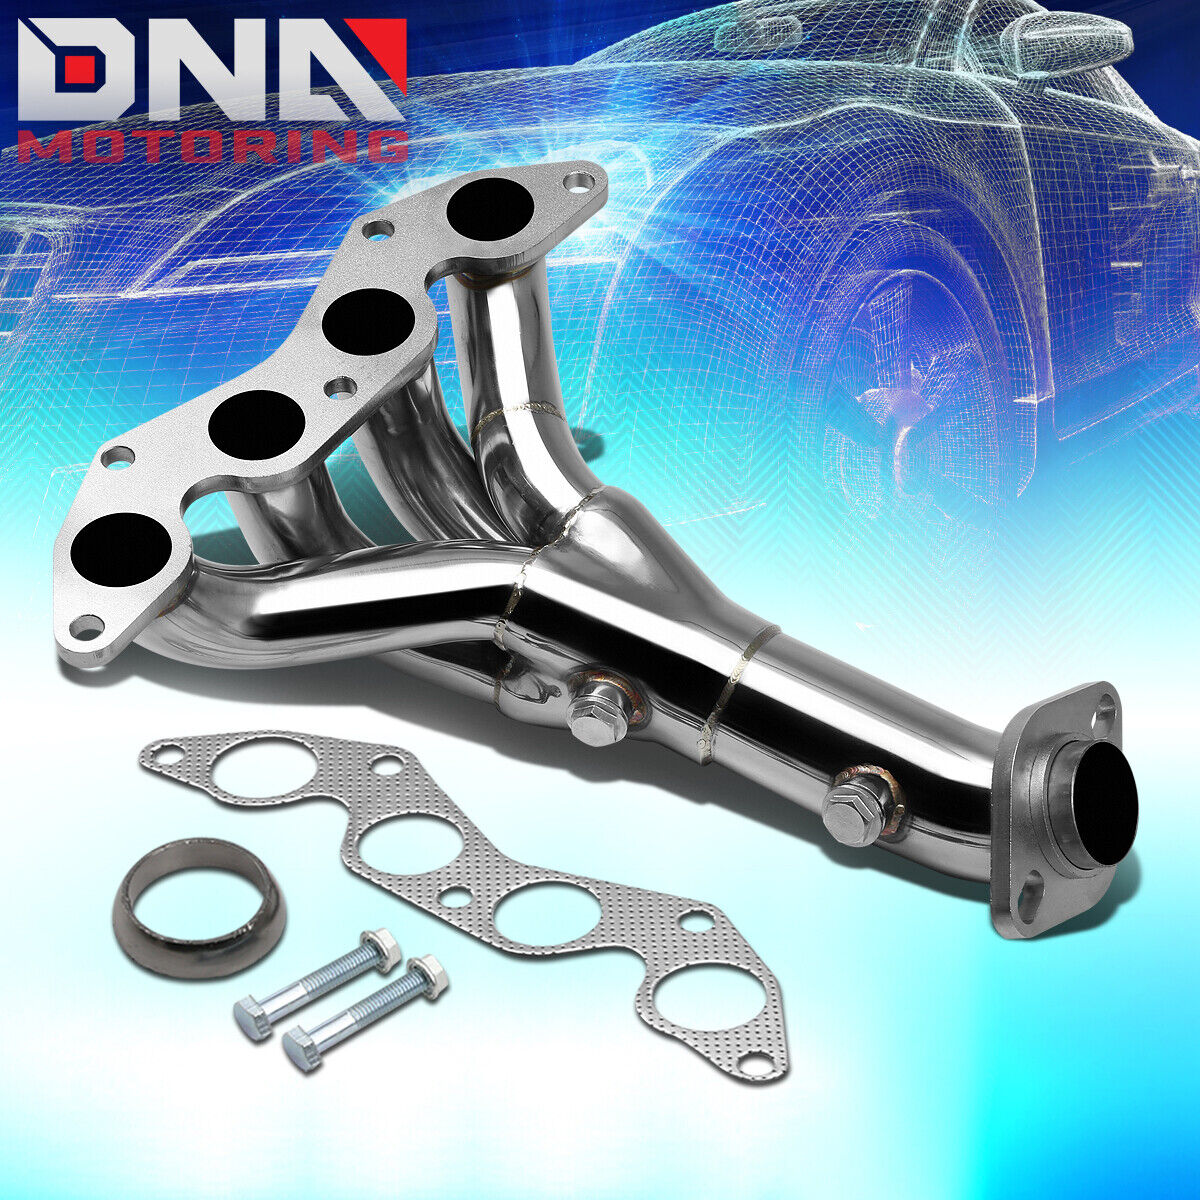 STAINLESS STEEL 4-1 HEADER FOR 01-05 CIVIC DX/LX D17 1.7L EM2 EXHAUST/MANIFOLD